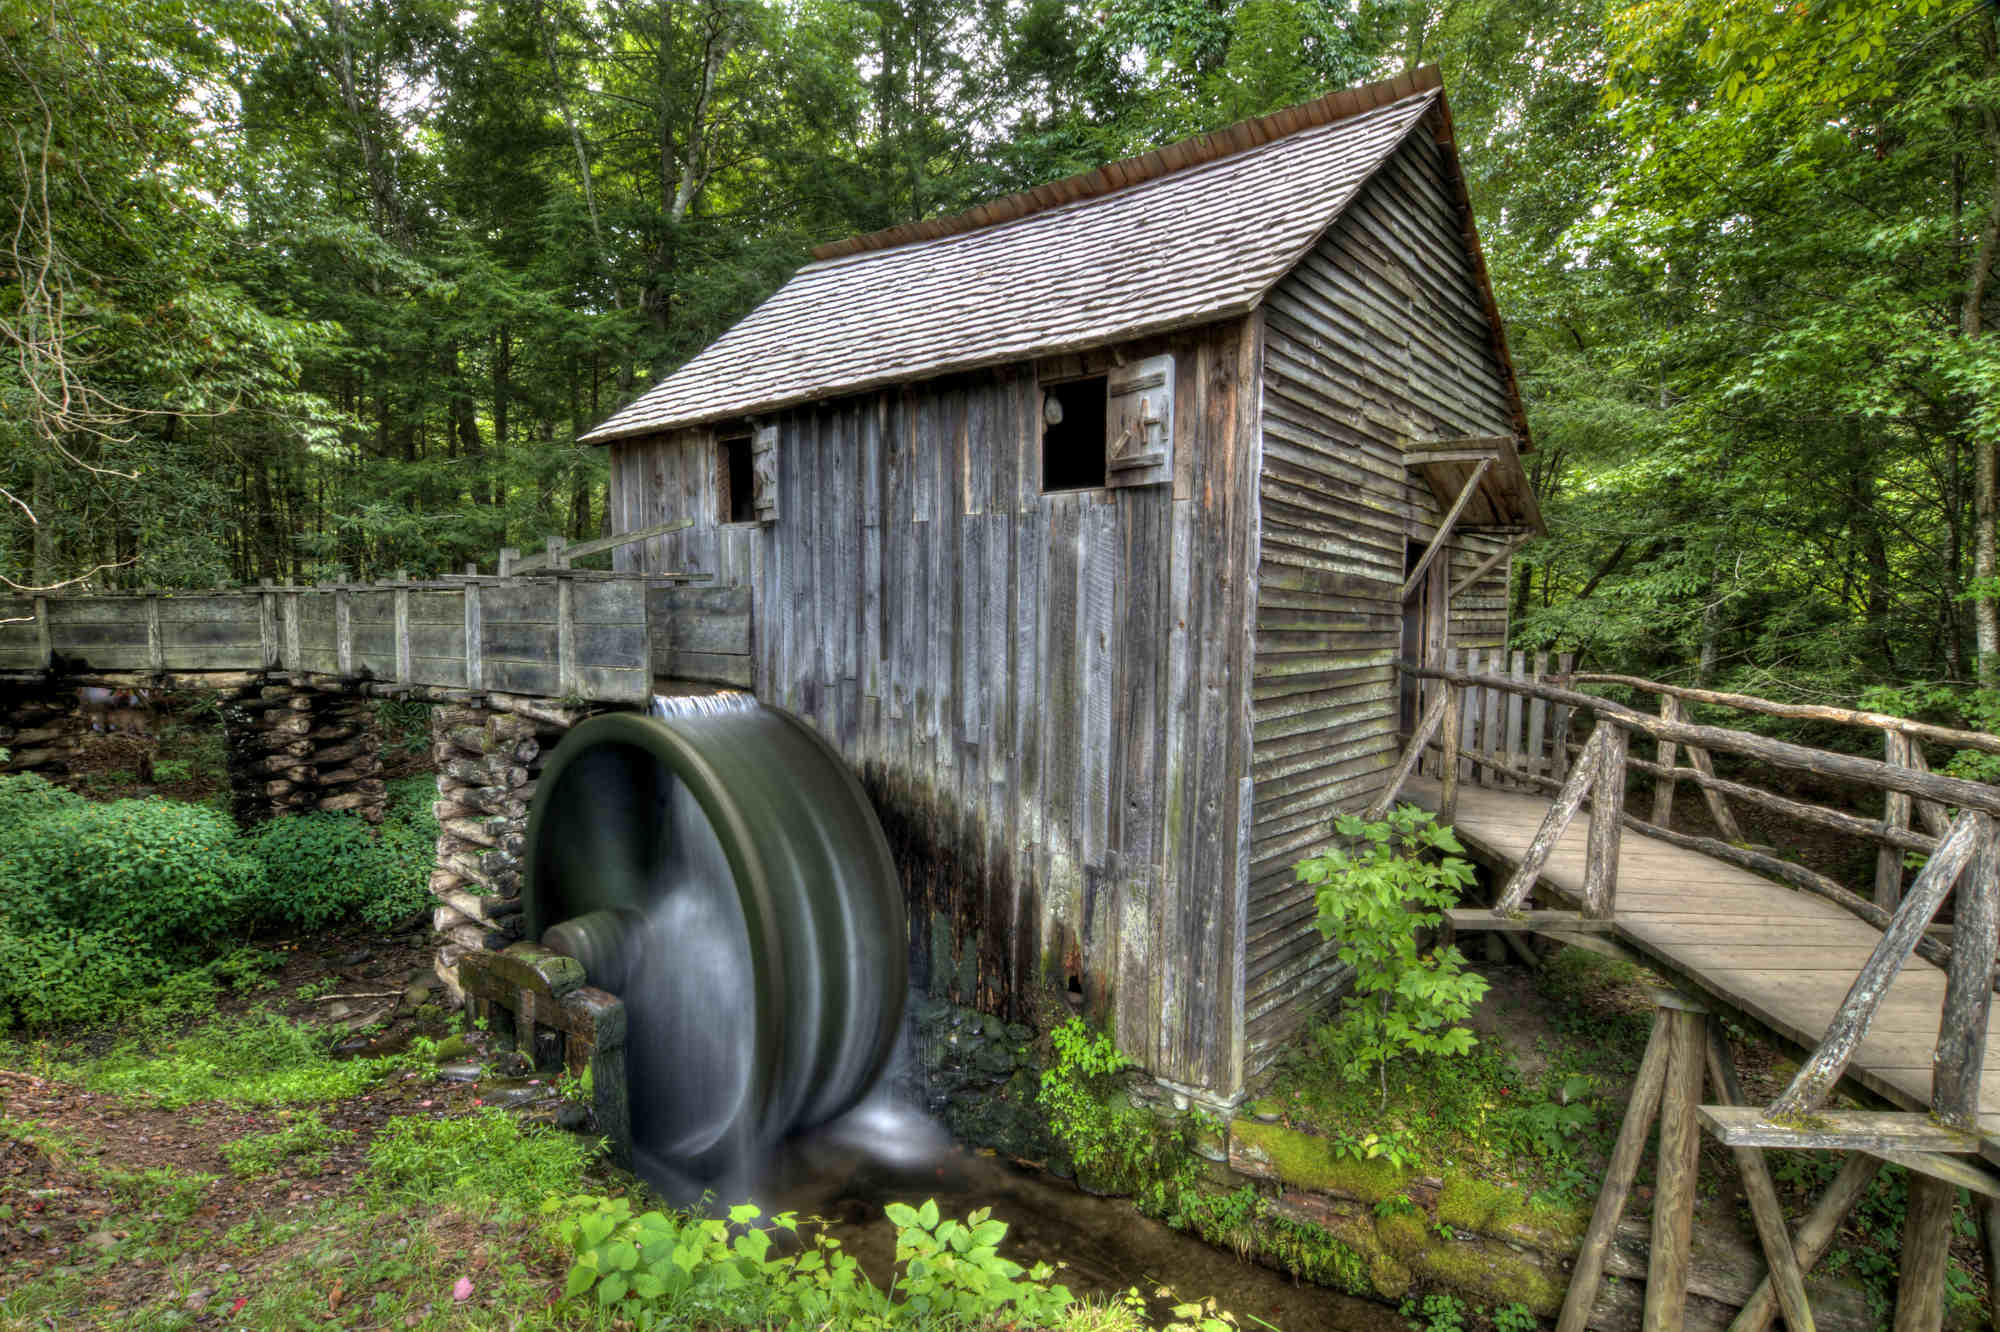 Water spins the wheel at the Cable Mill in Cades Cove in Great Smoky Mountains National Park.